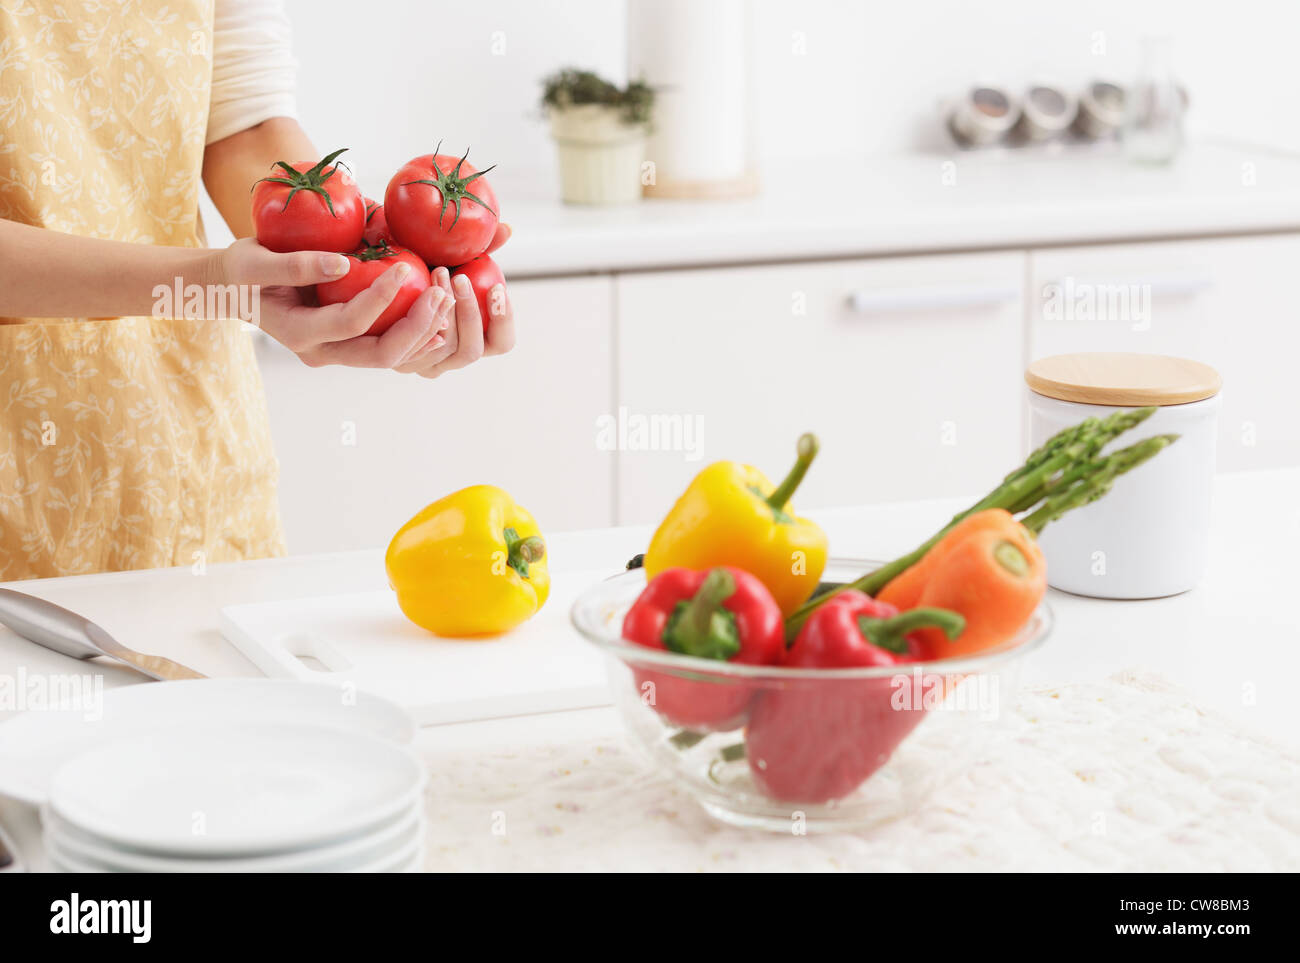 Woman Holding Fresh Tomatoes In Kitchen Stock Photo